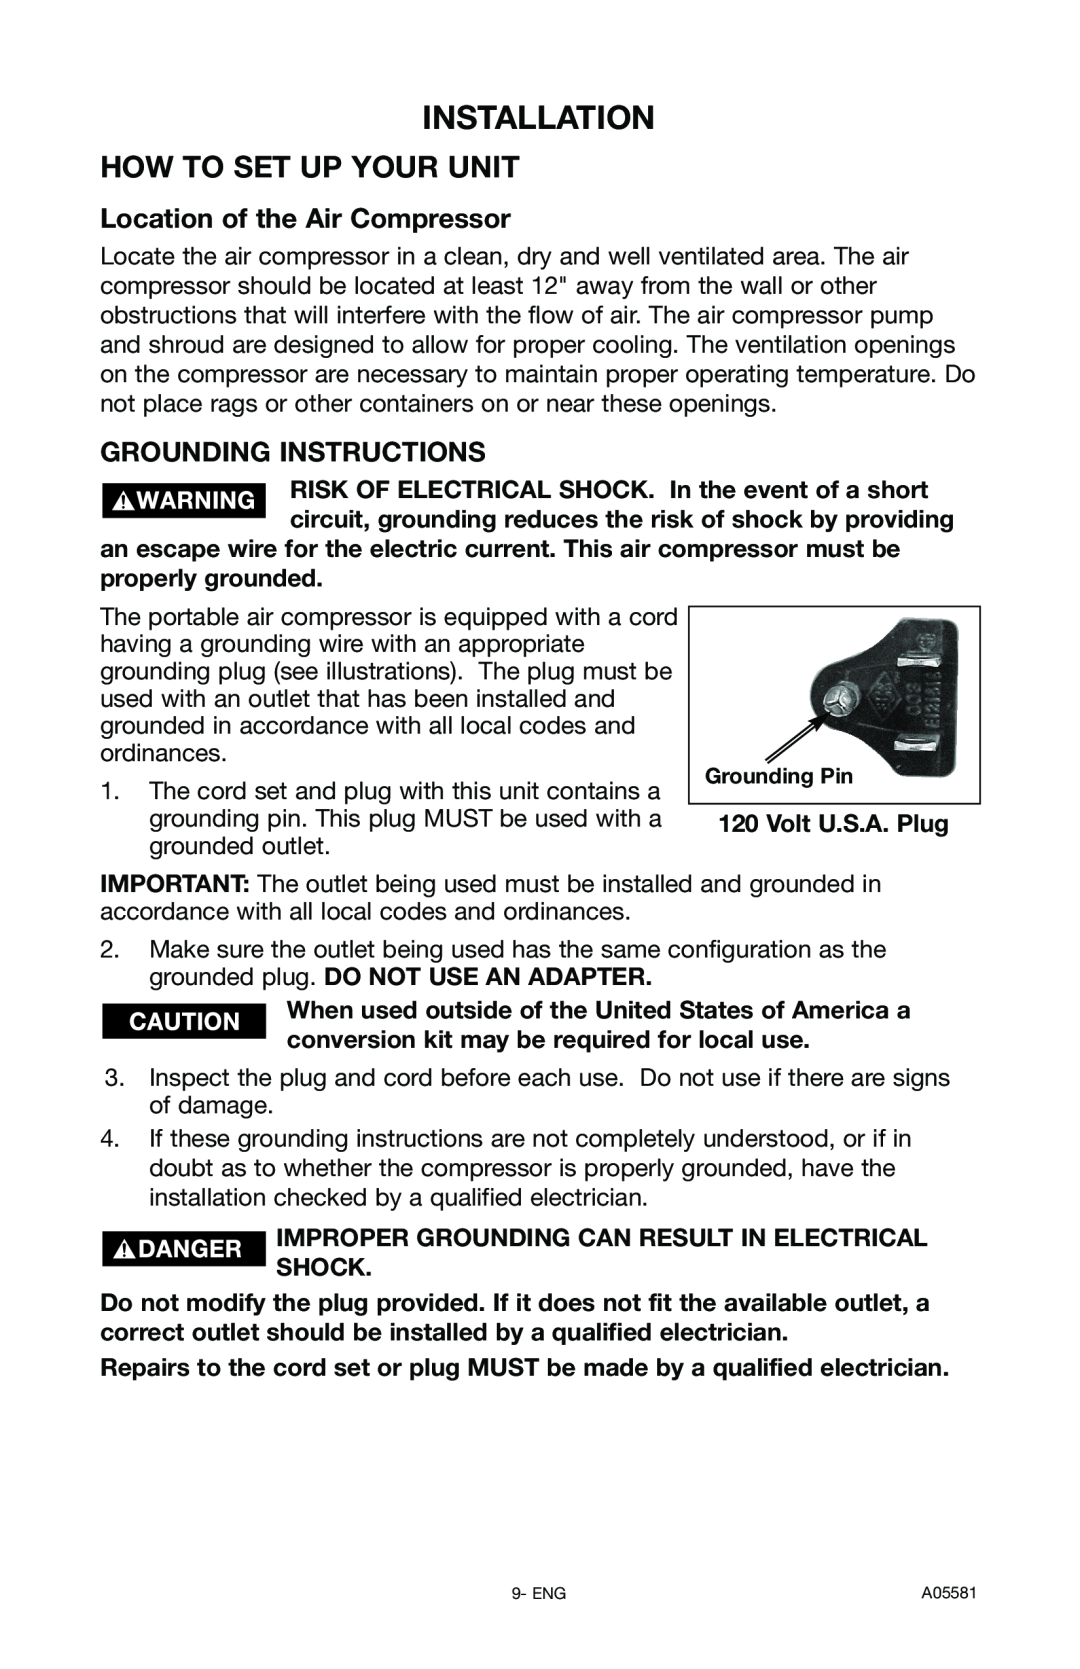 Delta CP201, A05581 Installation, How To Set Up Your Unit, Location of the Air Compressor, Grounding Instructions 